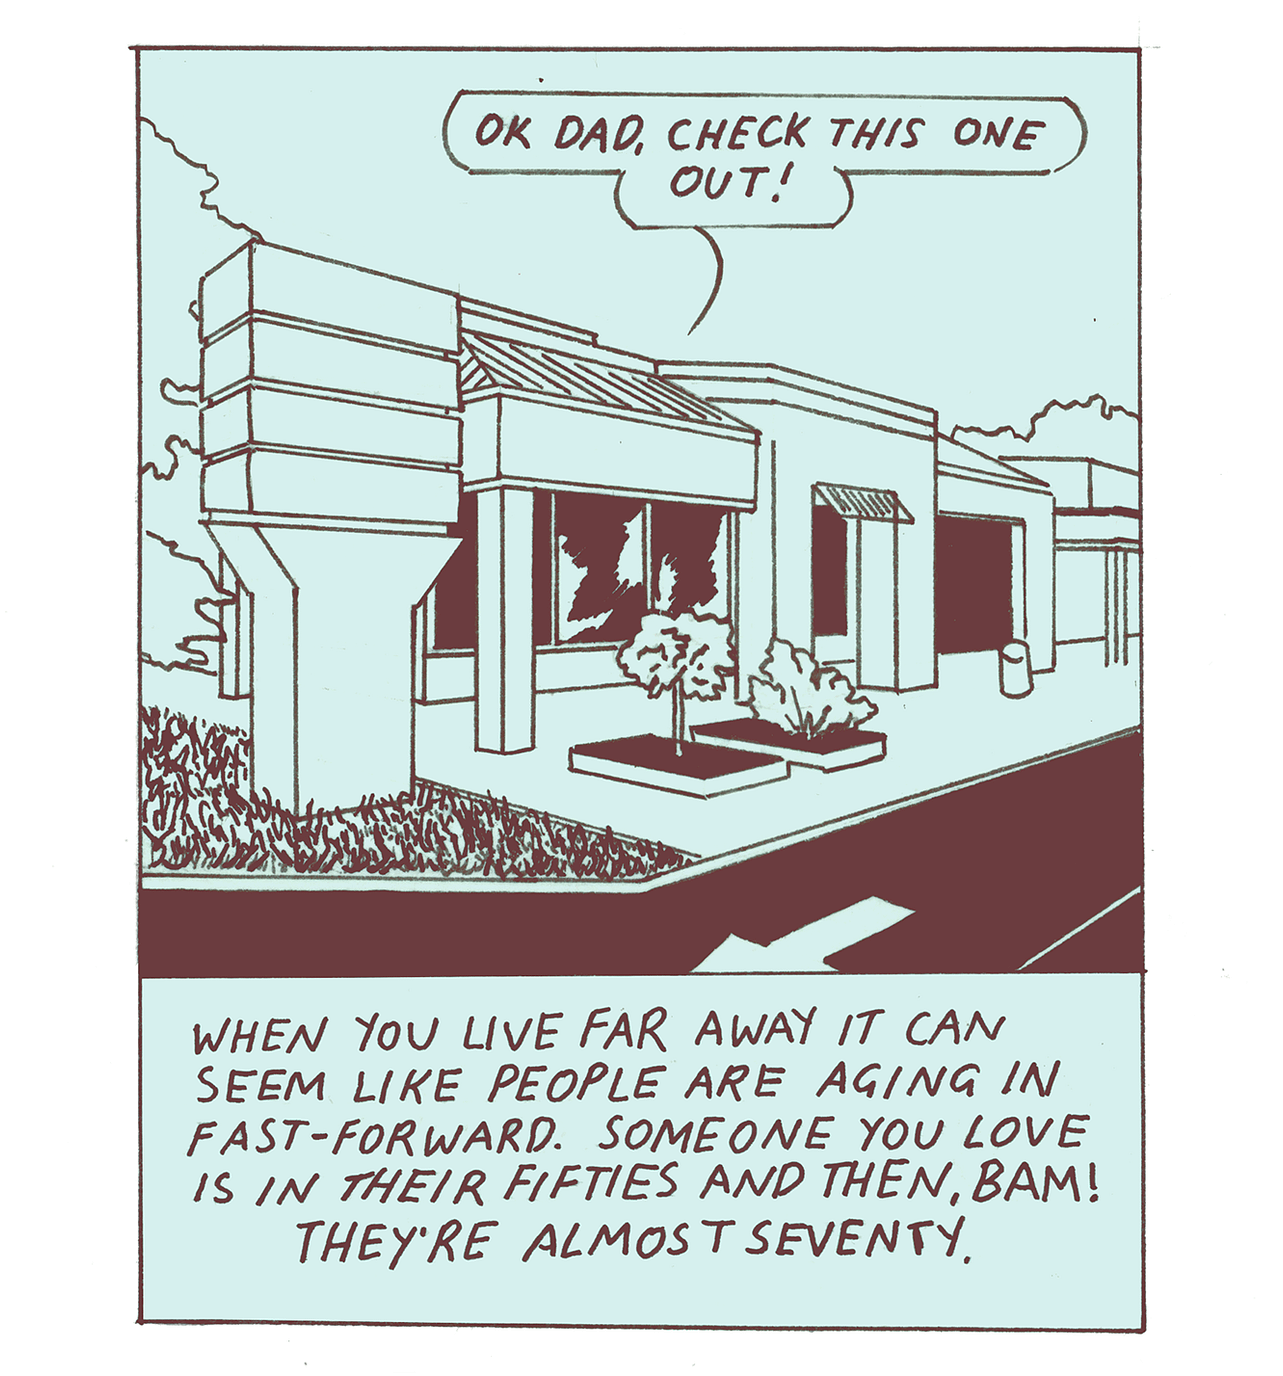 This comic was drawn with dark, reddish-brown ink on light blue paper. The first panel shows the exterior of a medical building. A speech bubble from inside the building reads, “OK Dad, check this one out!” The caption at the bottom of the panel says, “When you live far away it can seem like people are aging in fast-forward. Someone you love is in their fifties and then, BAM! They’re almost seventy.”